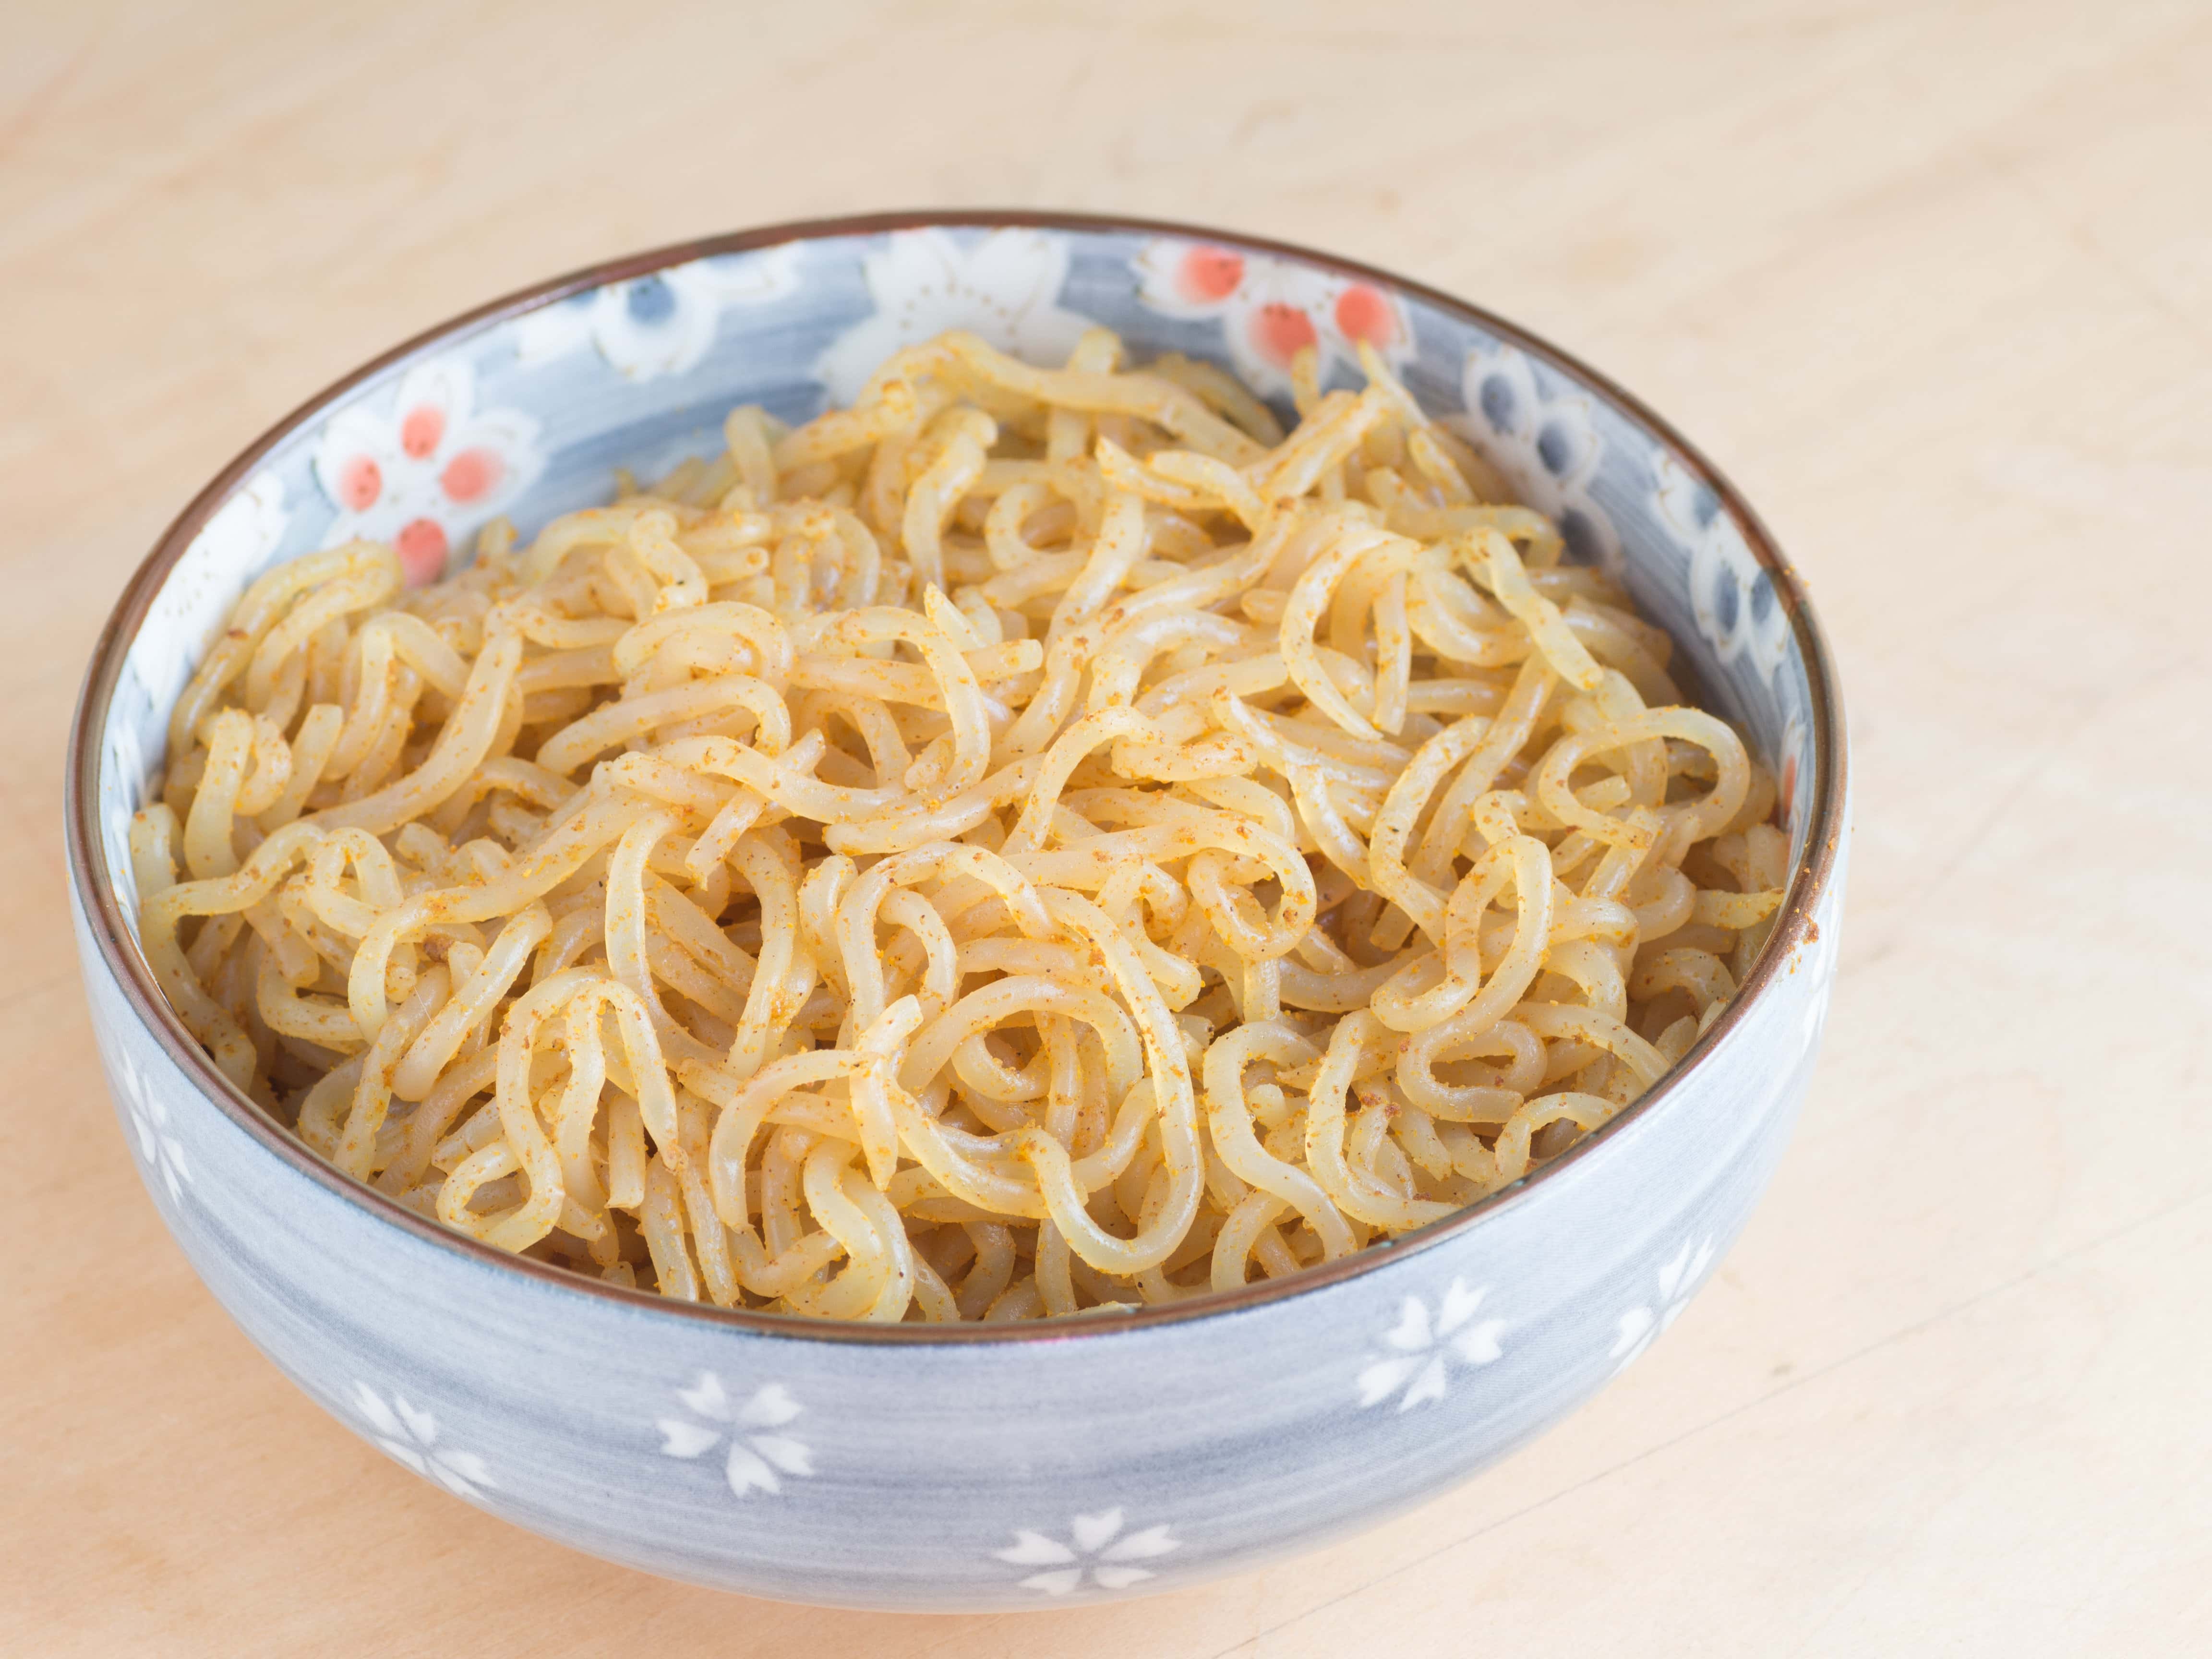 a light blue ceramic bowl of konjac noodles which are a great pasta alternative